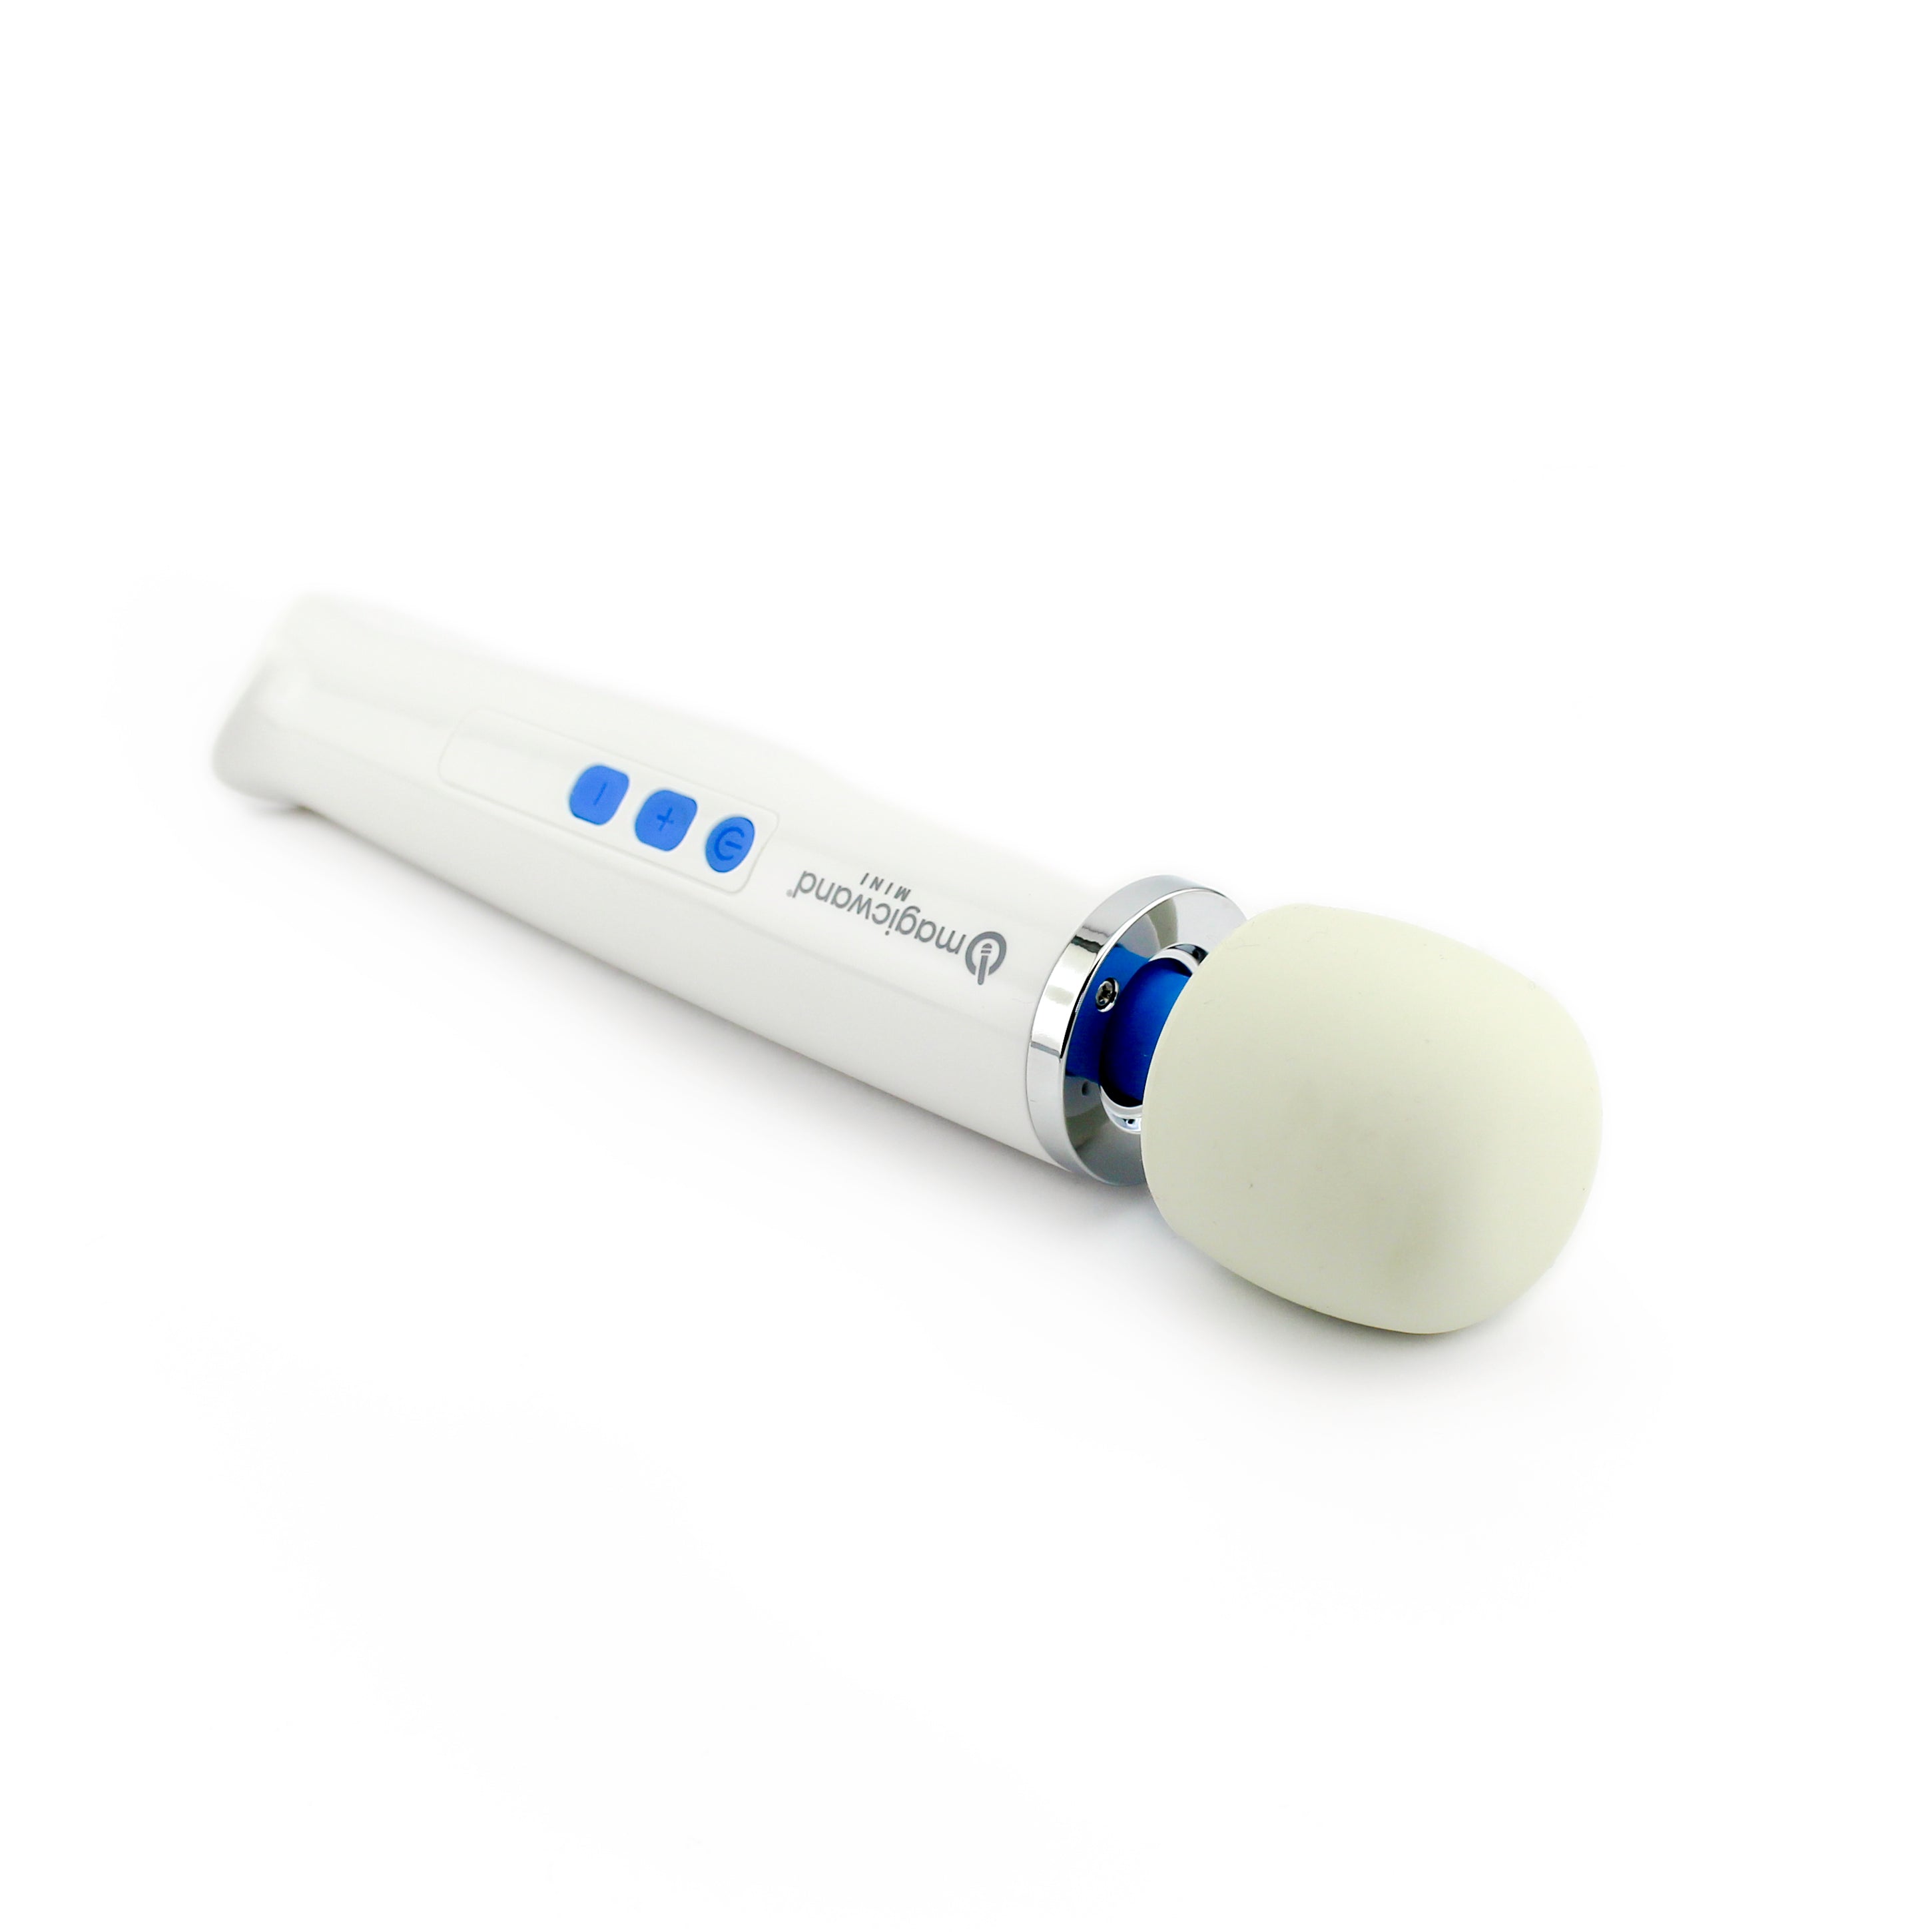 Image of This is The Mini Magic Wand - A Mini Version of the Hitachi Magic Wand. It is powerful, rechargeable, and easy to use.